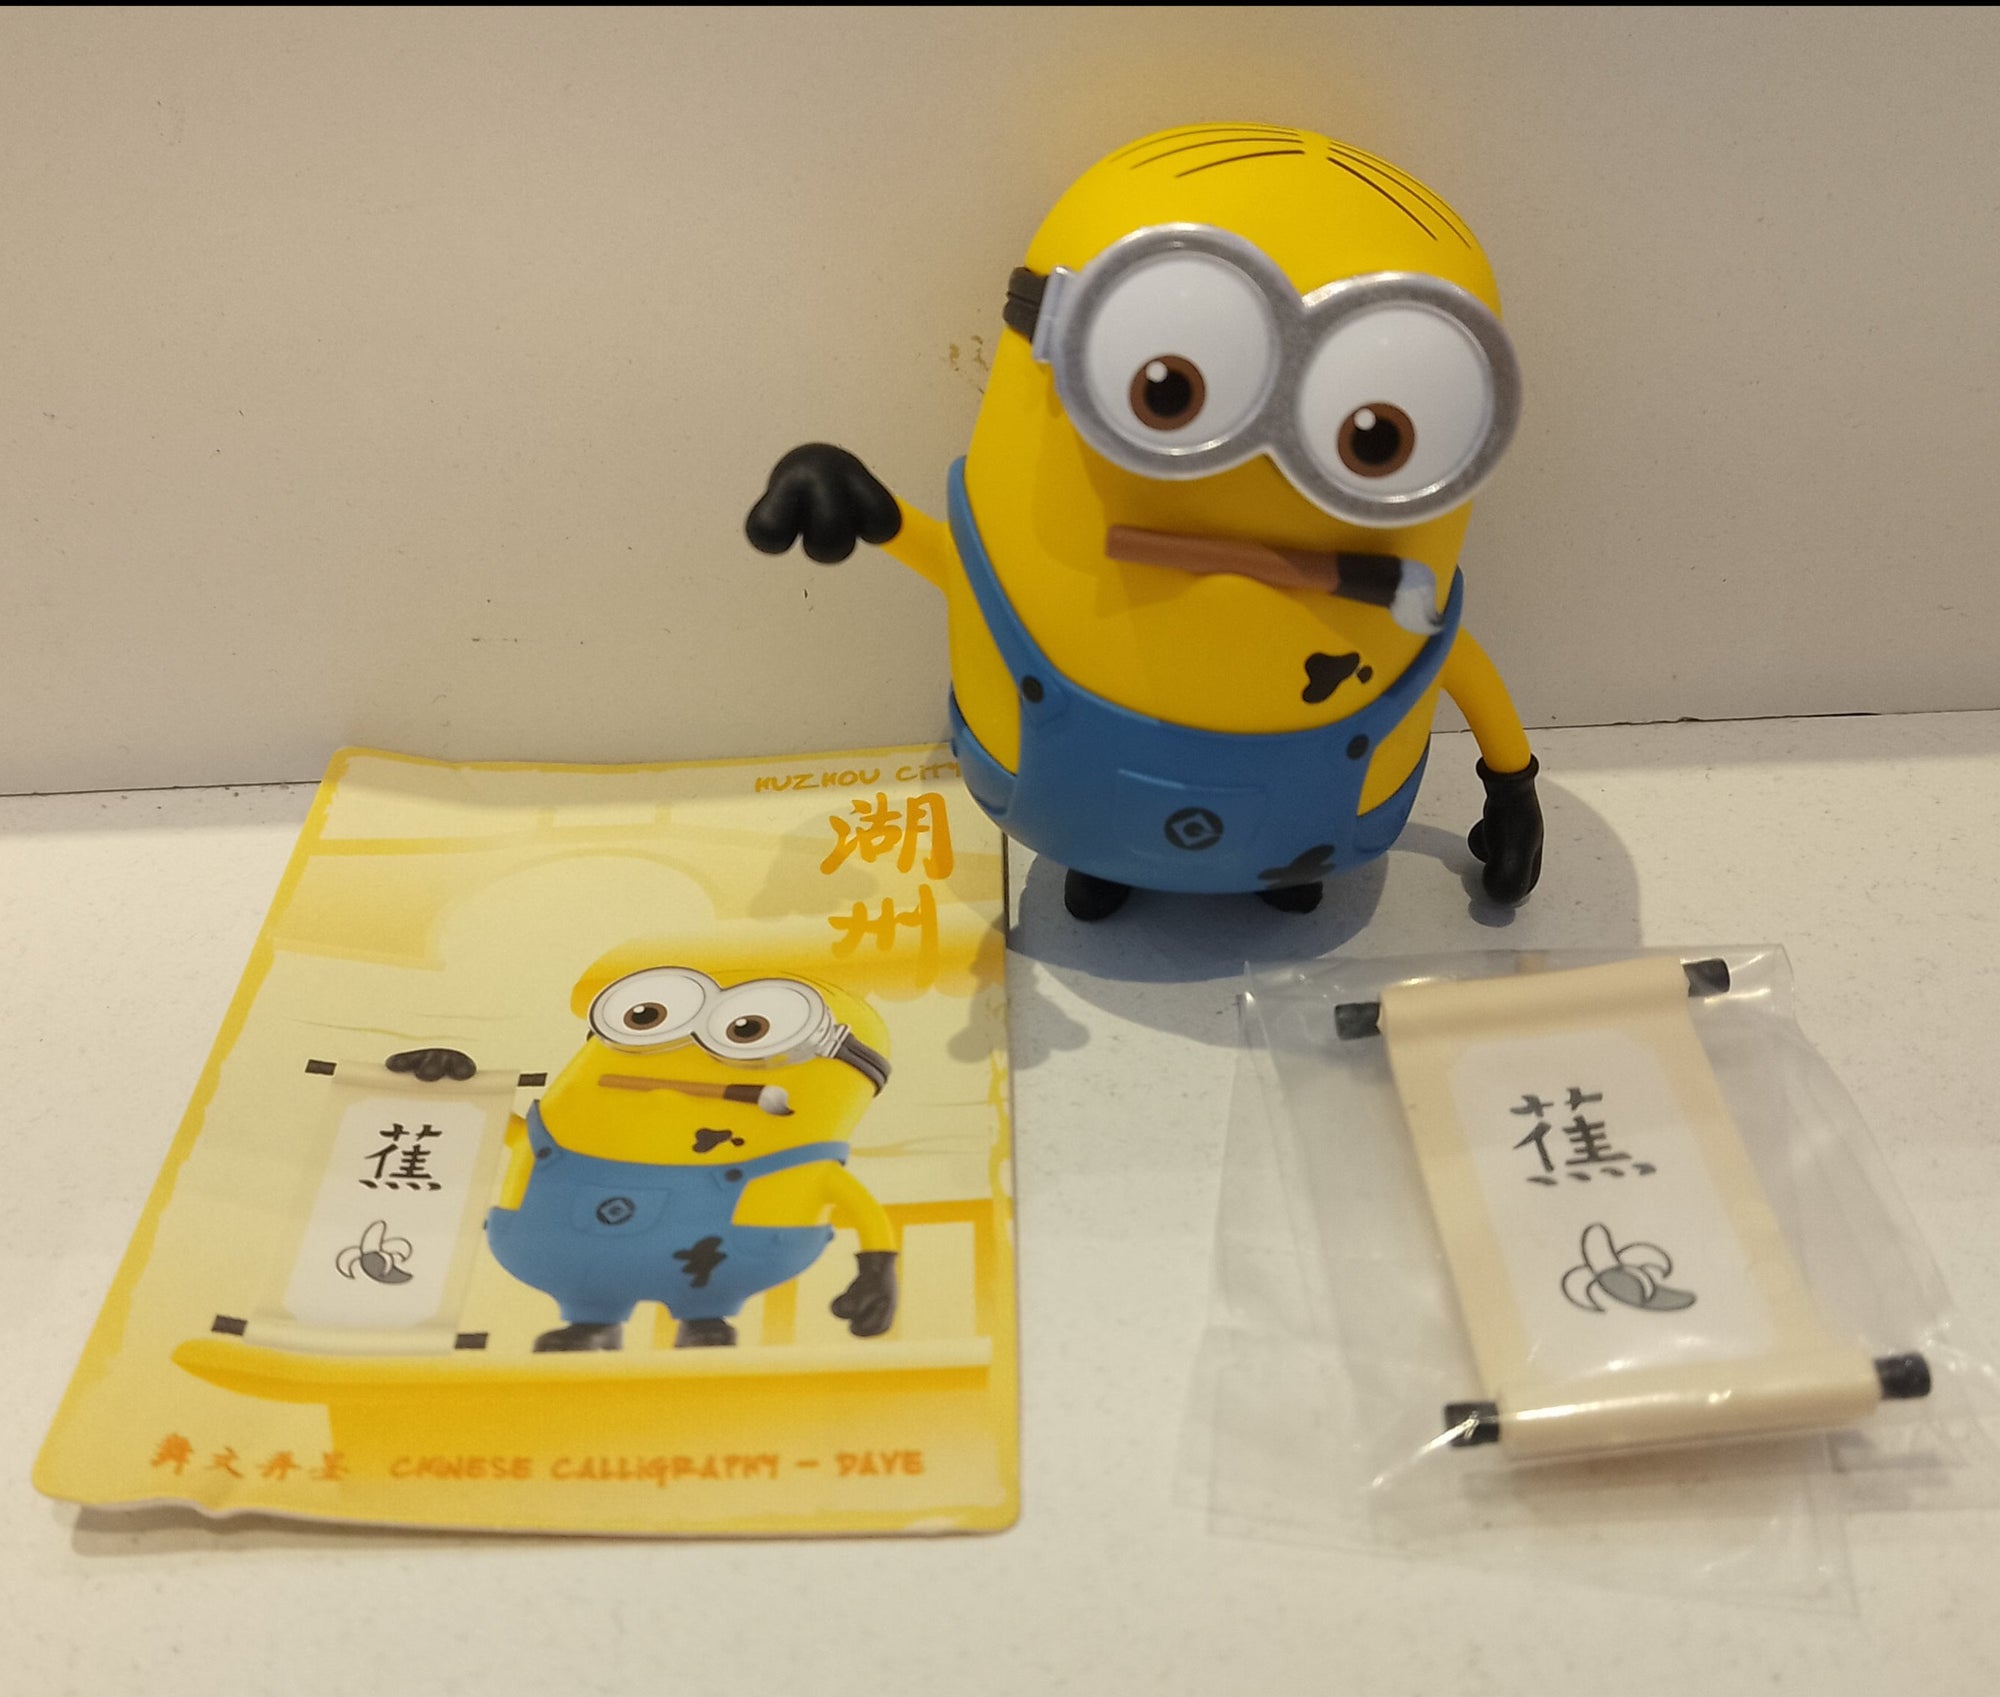 Chinese Calligraphy Dave - Minions Travelogues of China Pop Mart